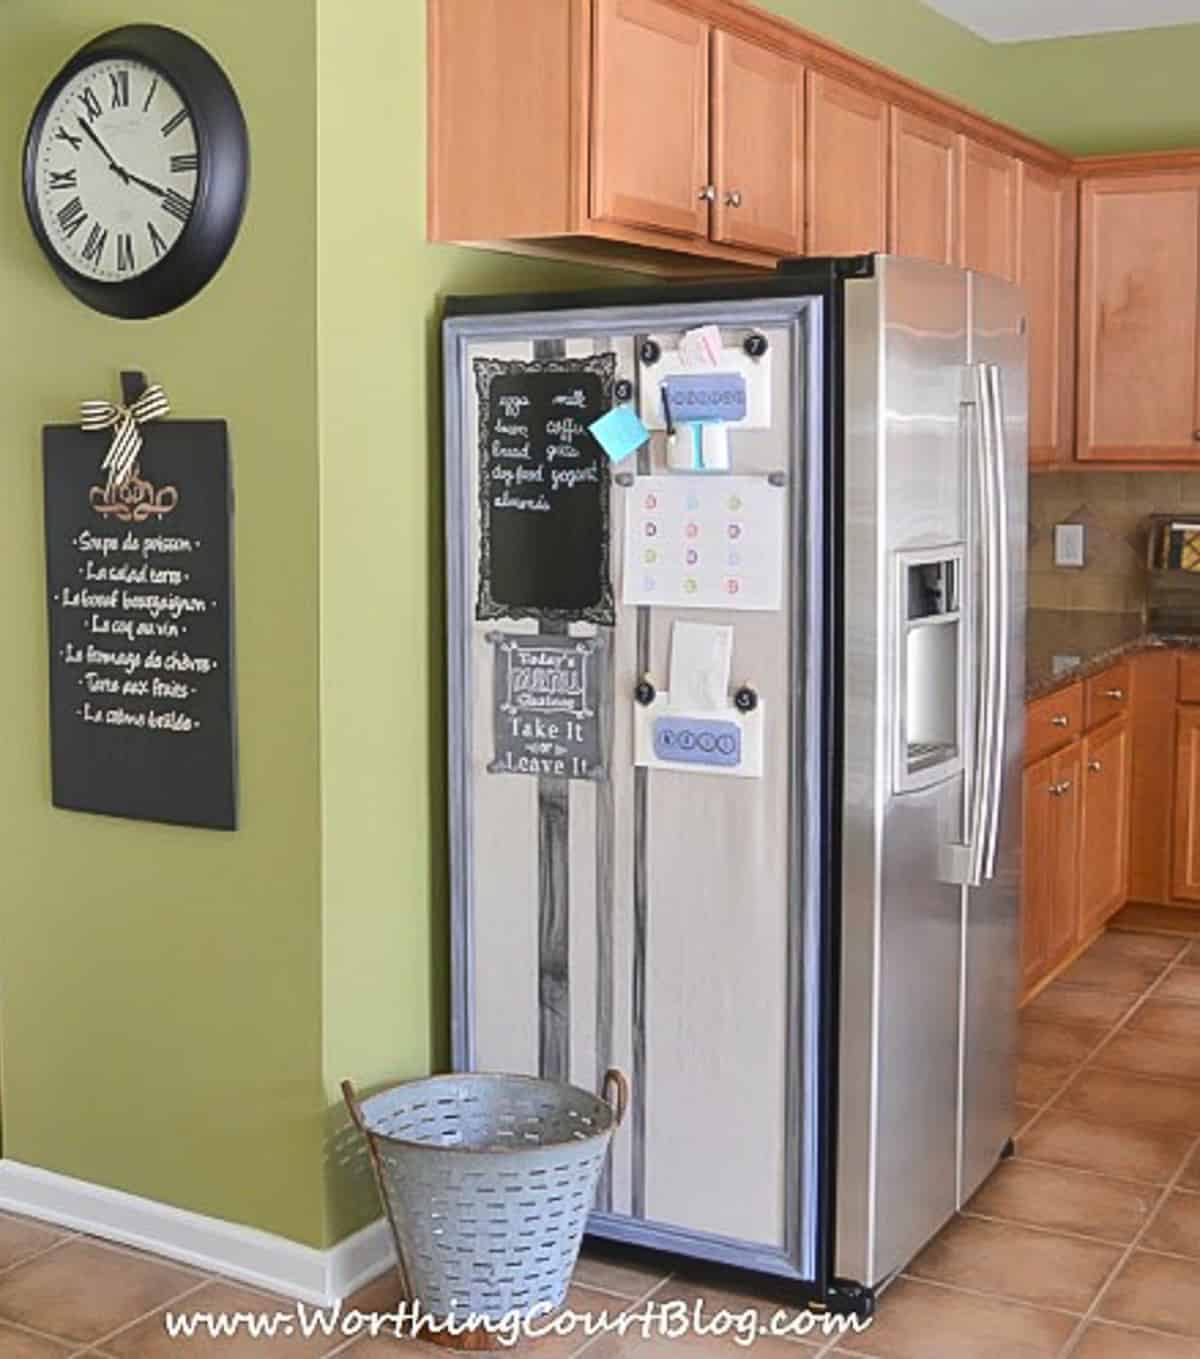 side of refrigerator with diy bulletin board in a kitchen with green walls and wood cabinets